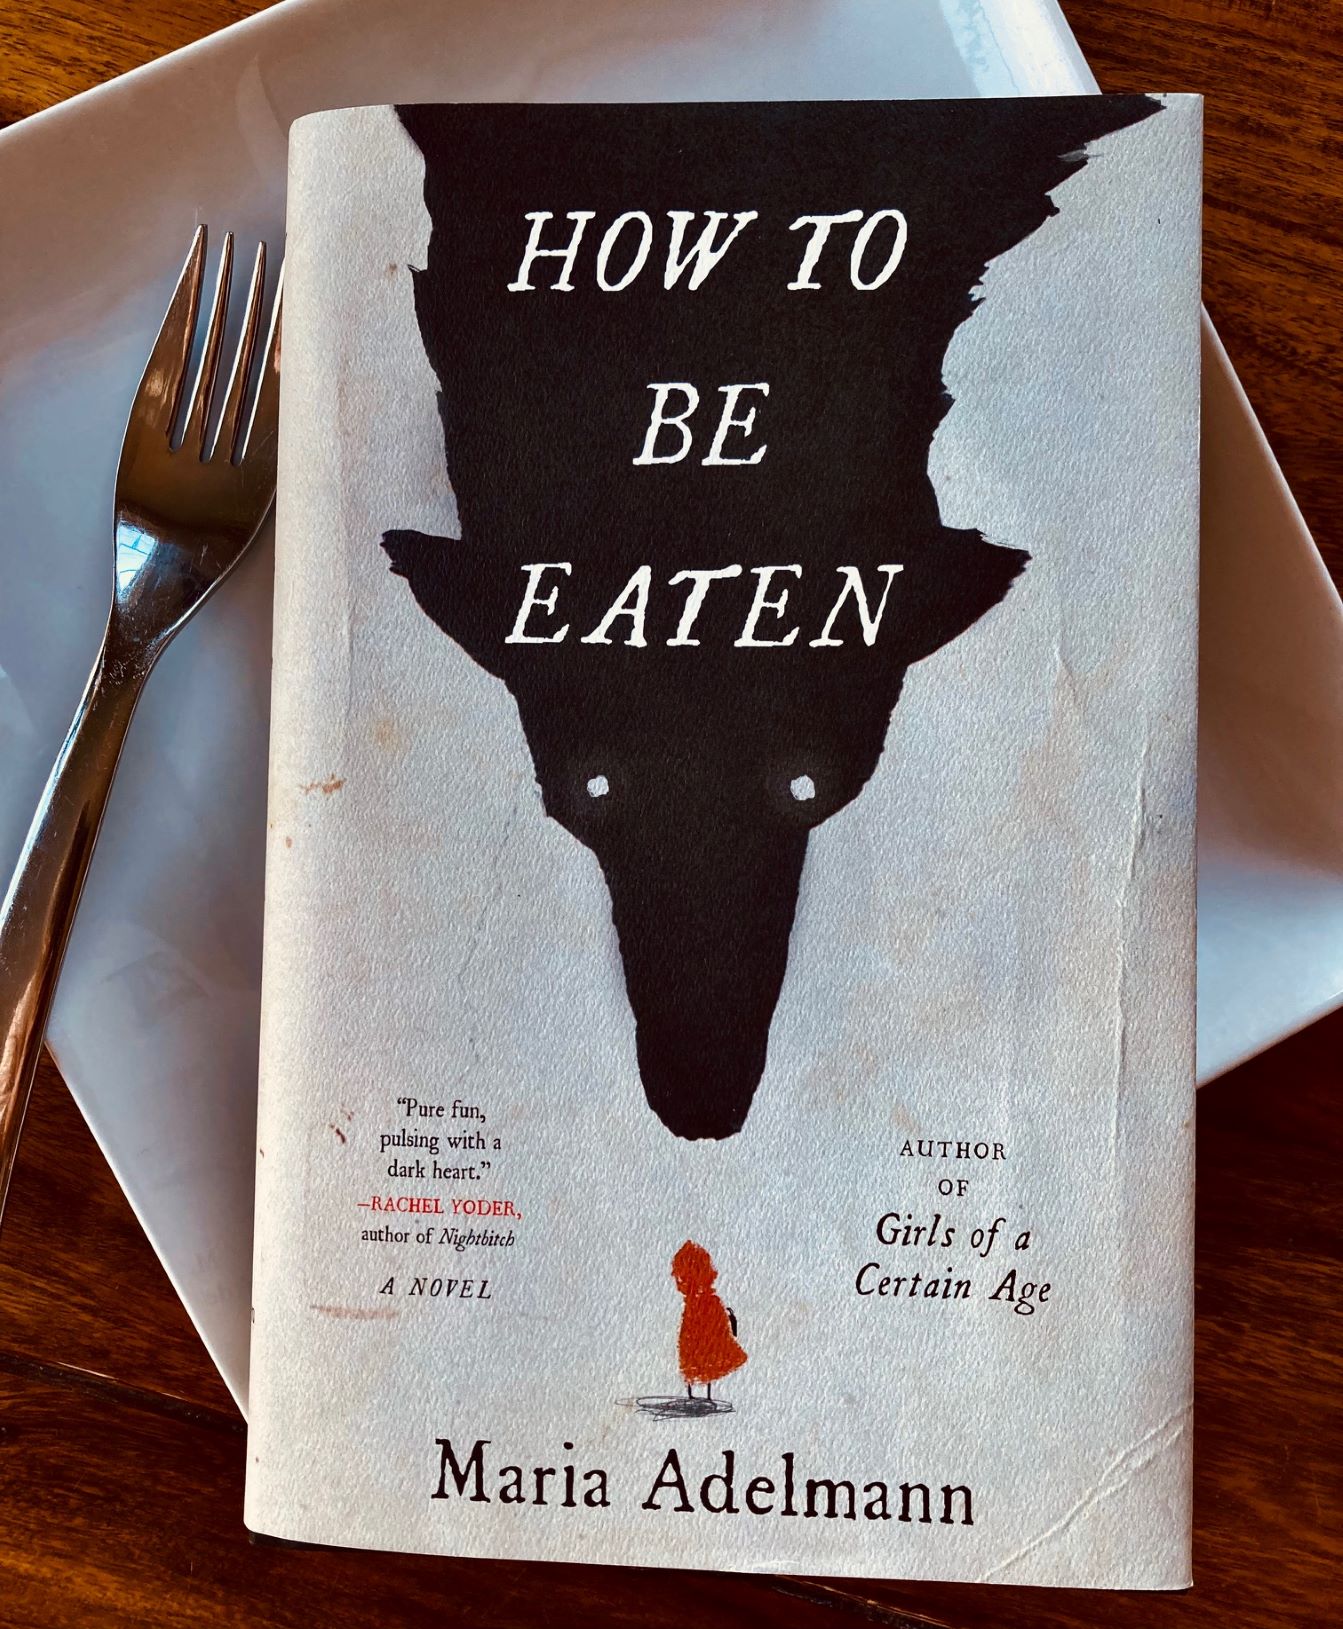 How to Be Eaten by Maria Adelmann book pictured on a dinner plate with a fork on the left hand side of it